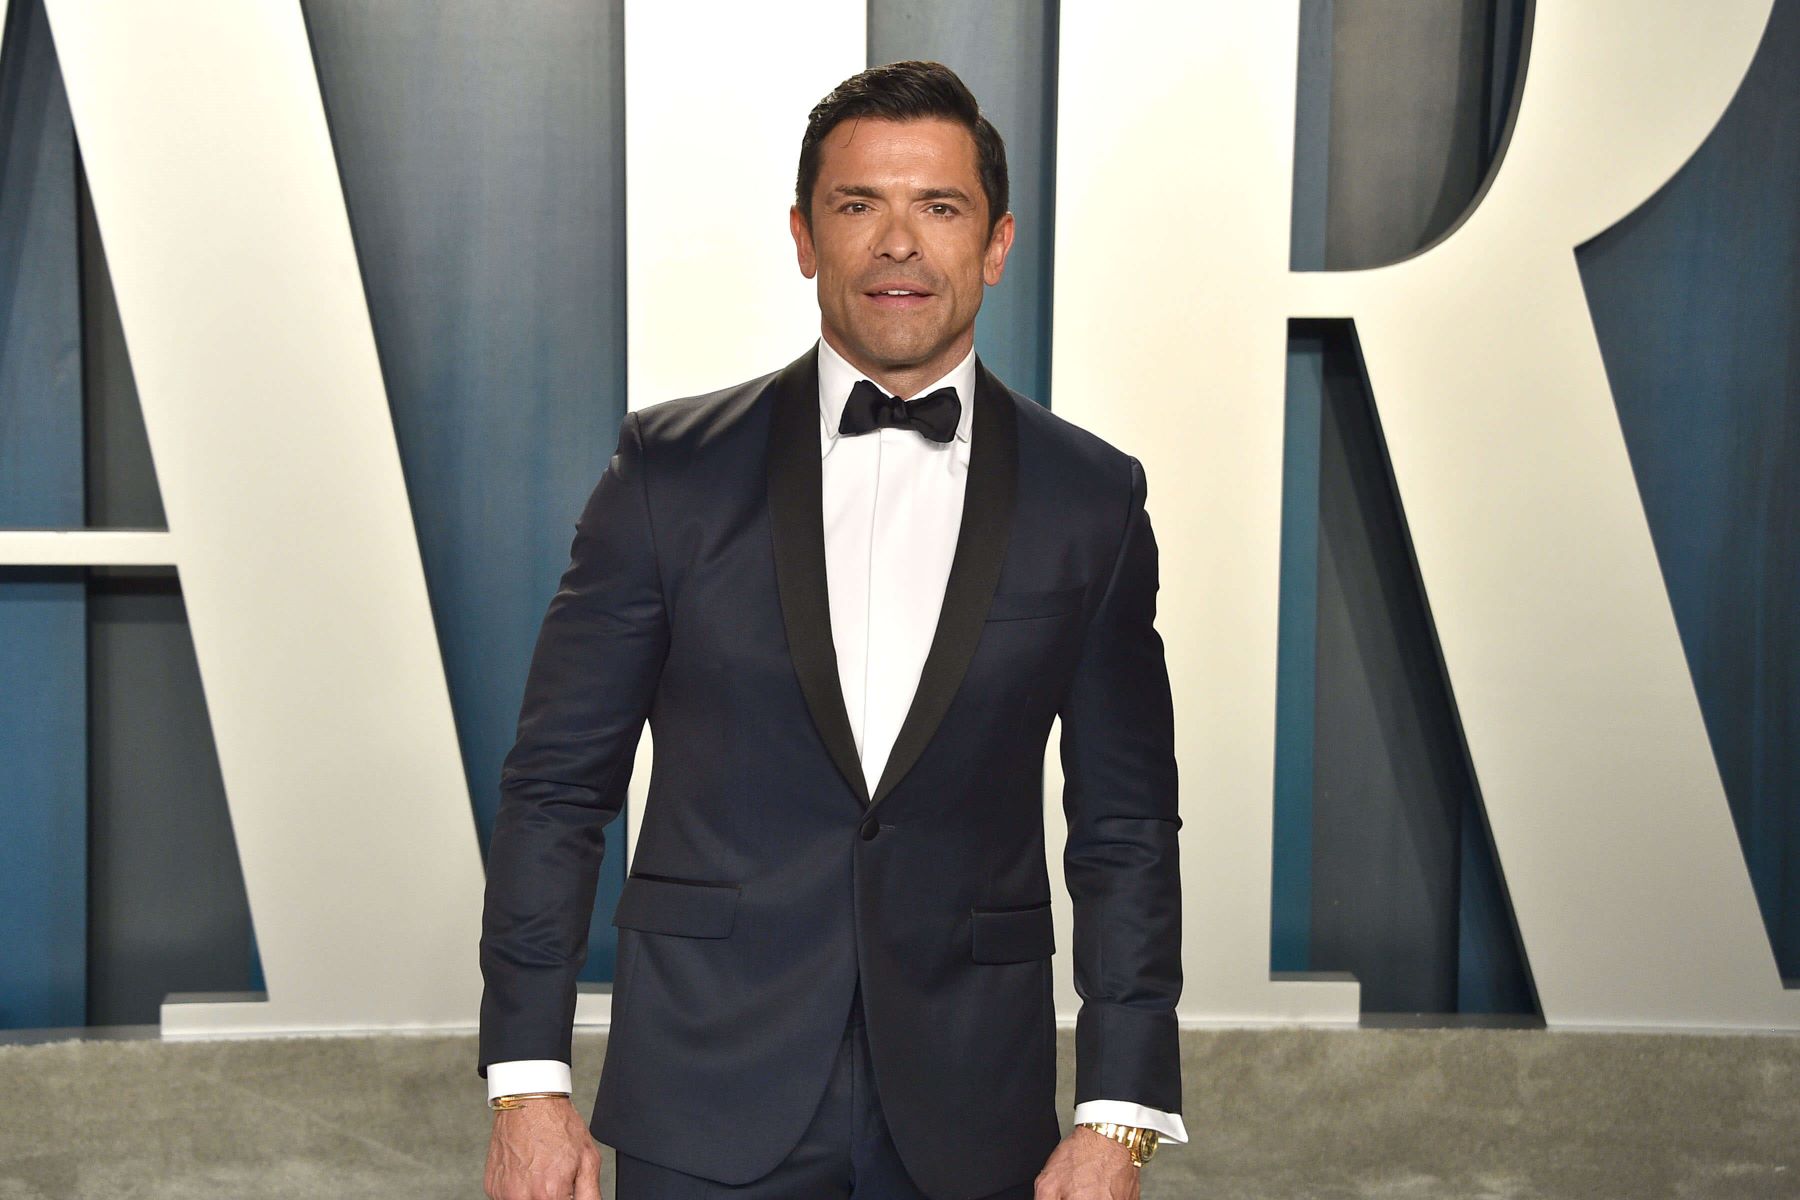 Mark Consuelos, who appears in 'How I Met Your Father' Season 2, wears a dark blue suit over a white button-up shirt and black bow tie.